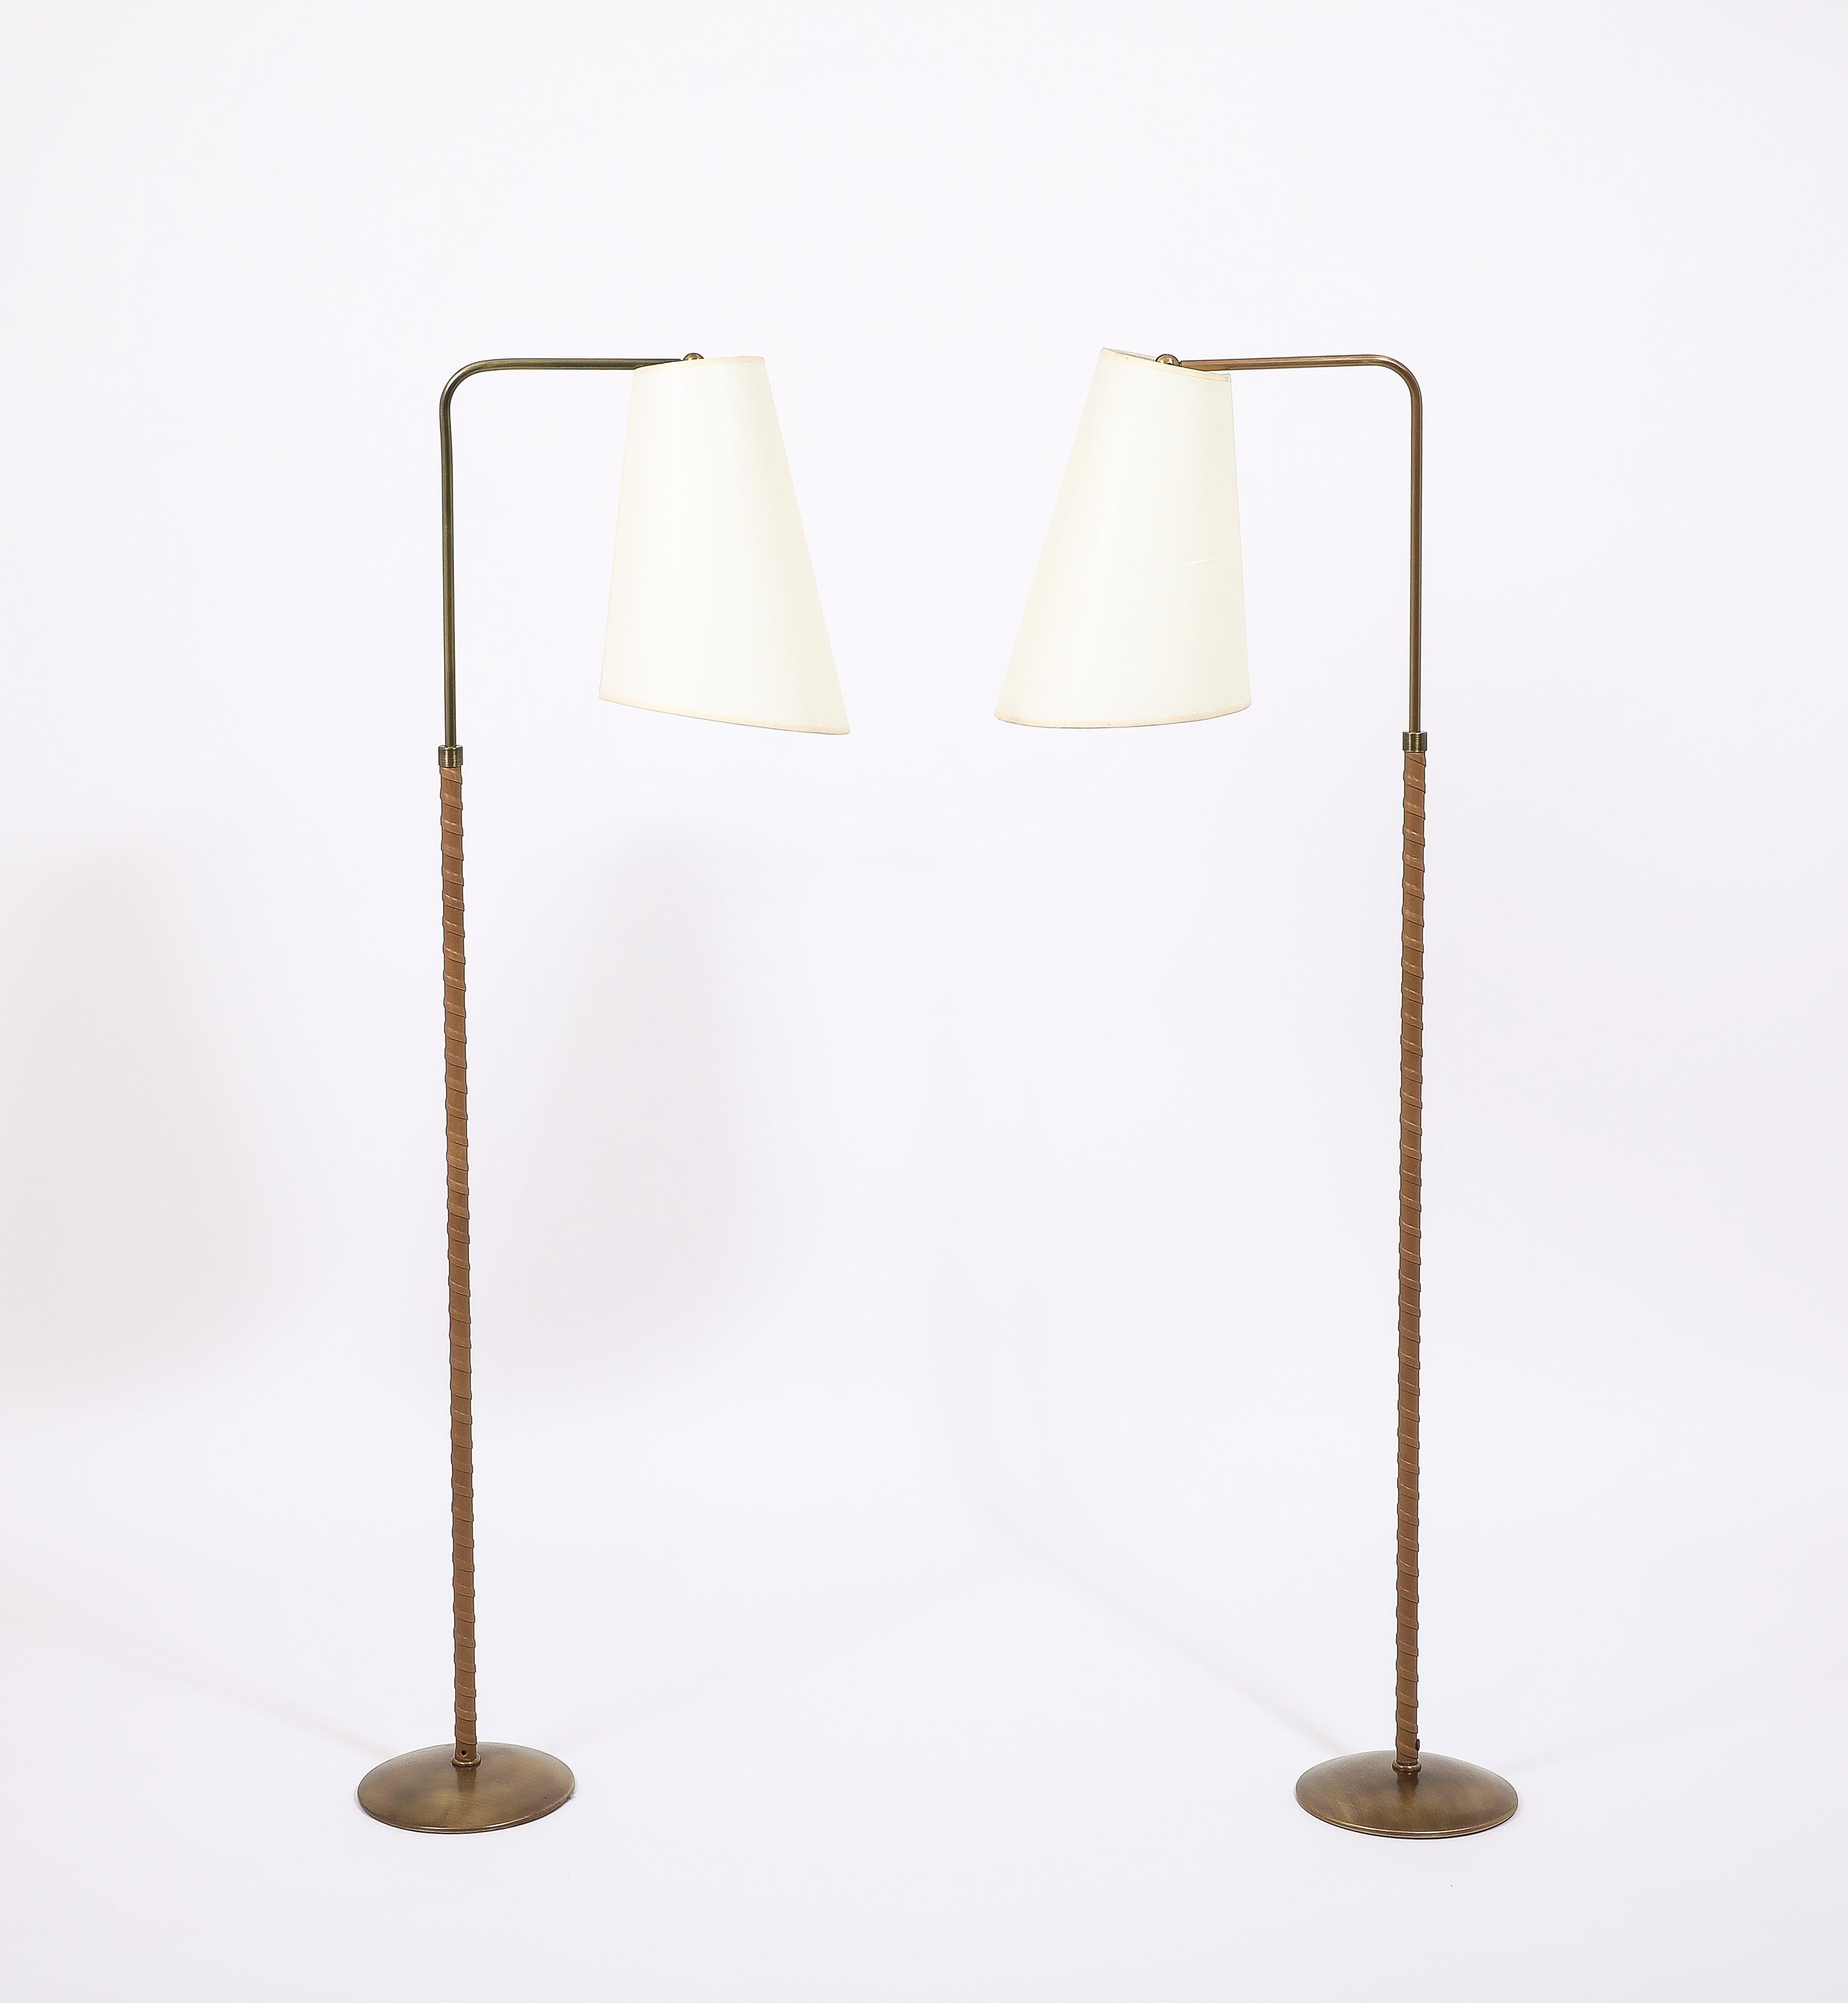 Brass reading floor lamps by Metalarte Elegantly Wrapped in a light tan leather, fully adjustable in height from 50” to 70”.
